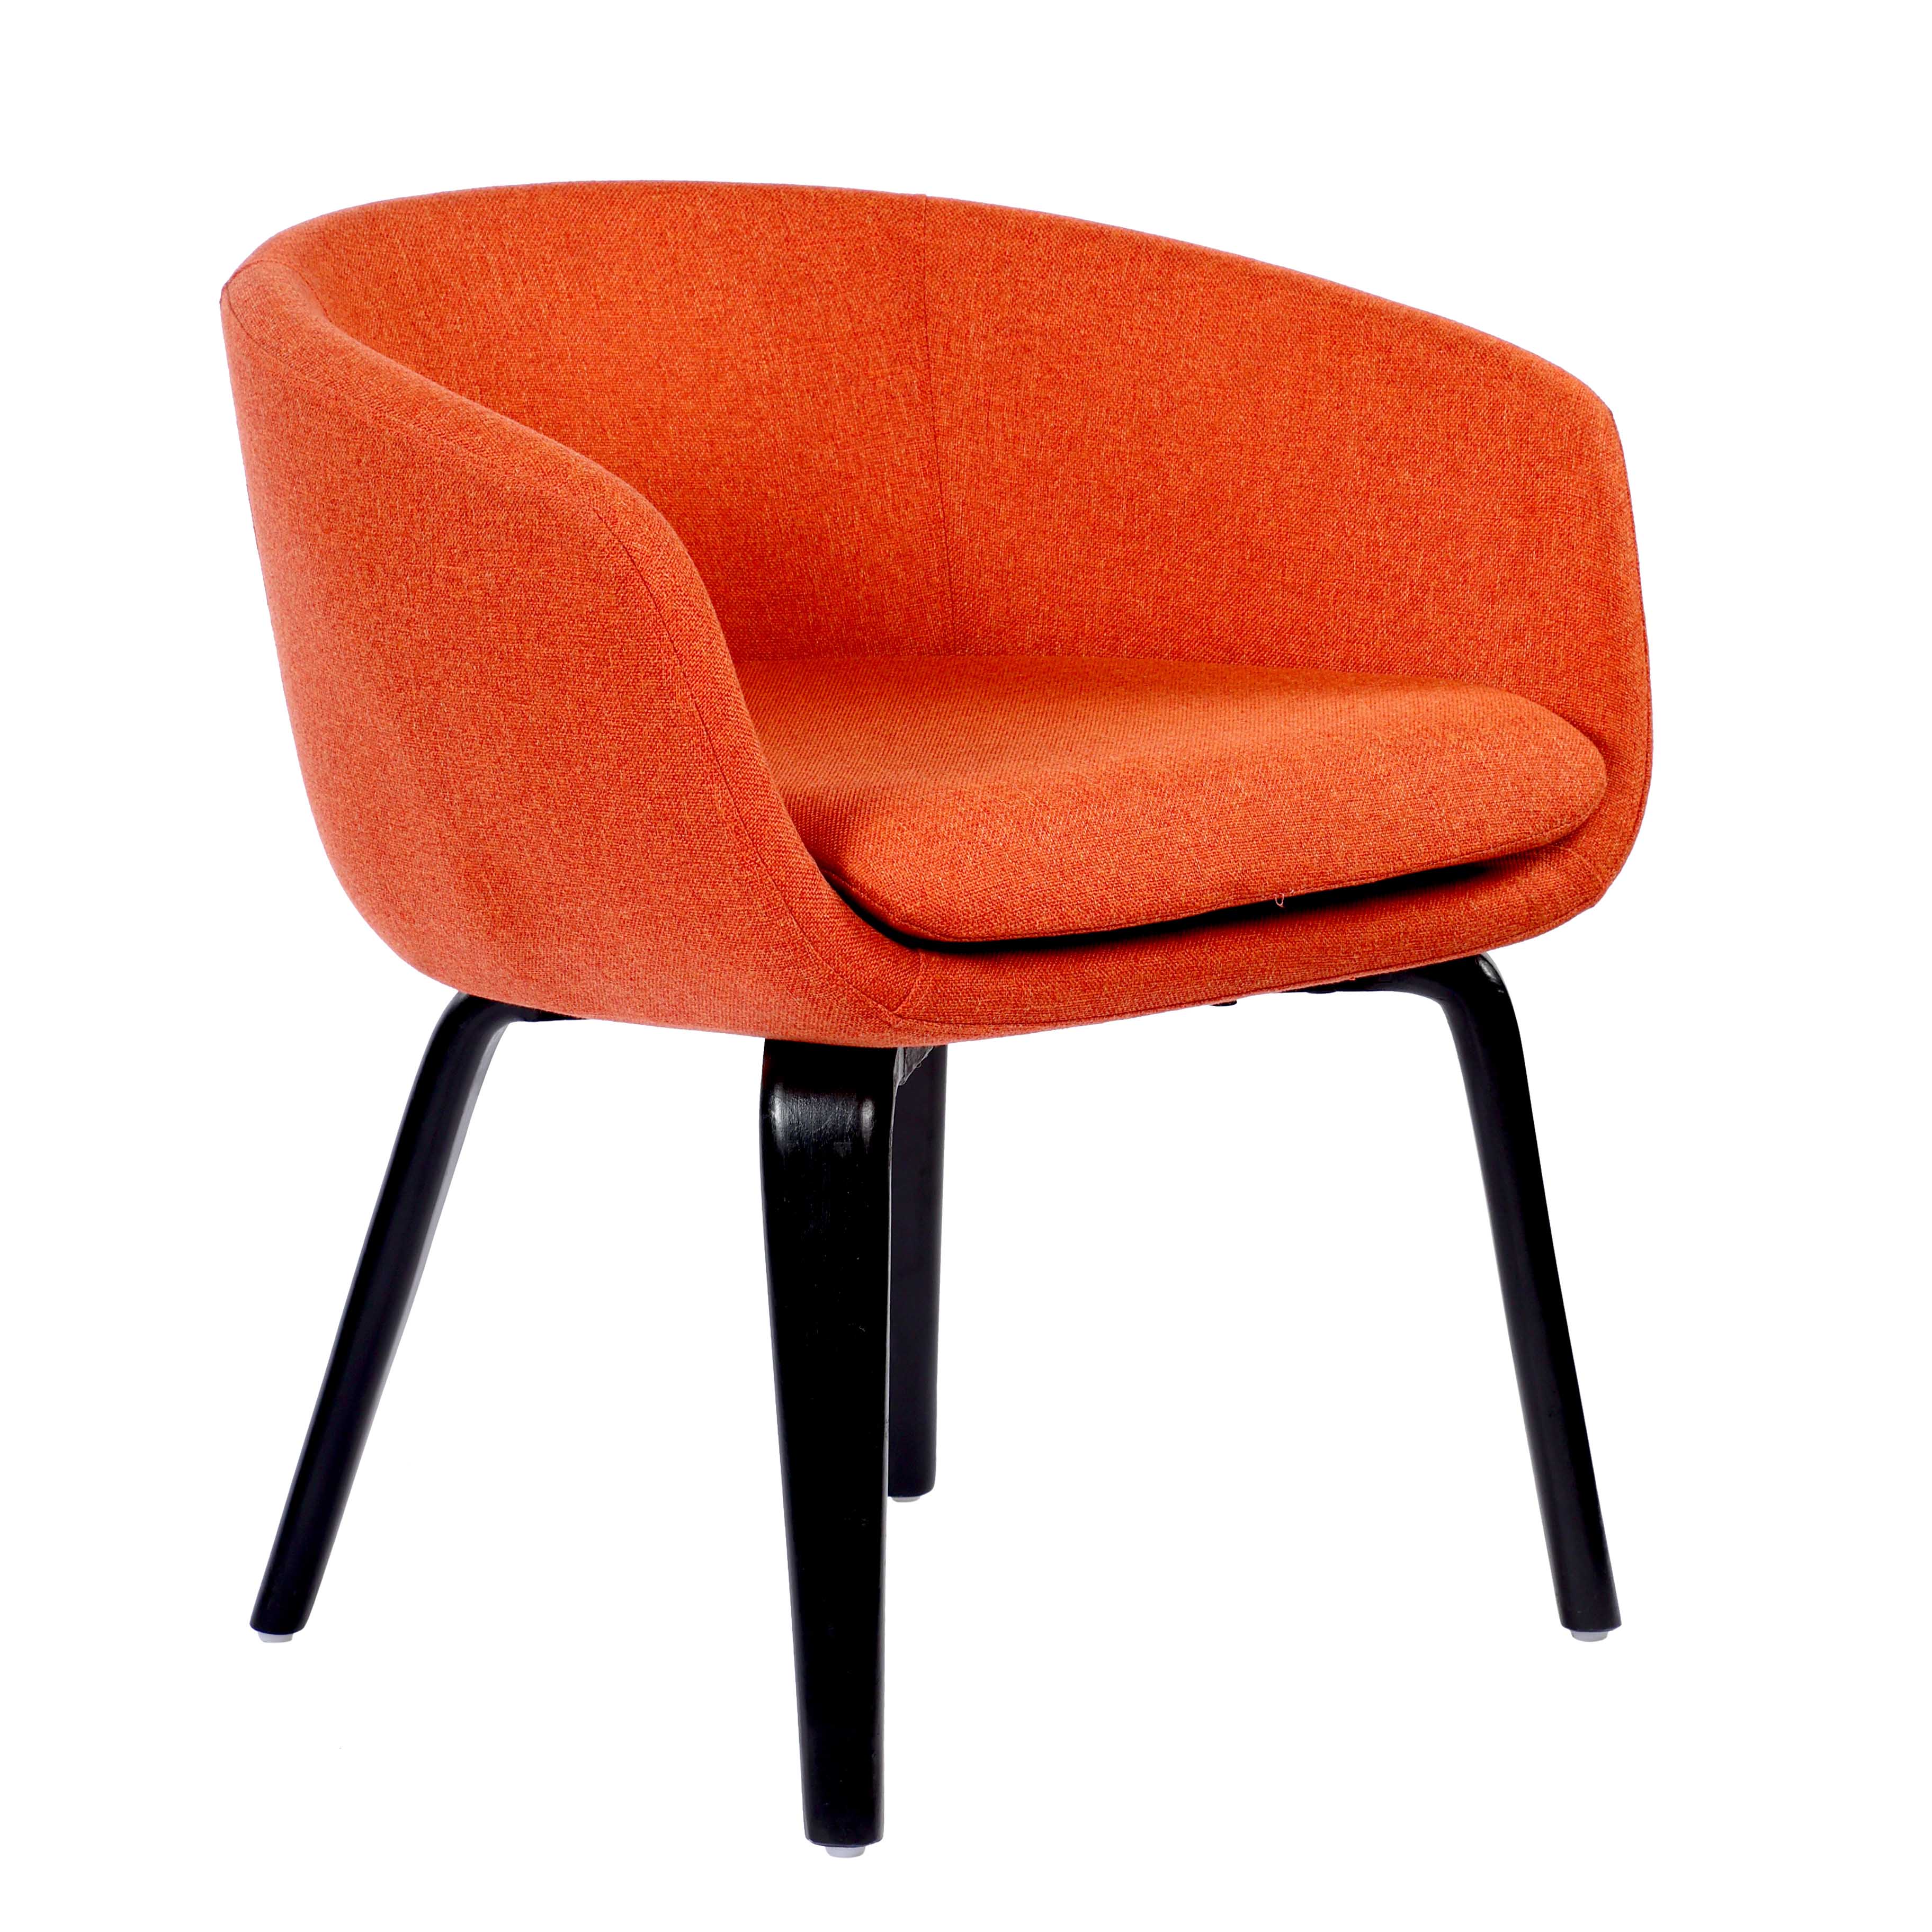 Emilia Modern Fabric Upholstered Lounge Chair With with Wooden Legs - Orange